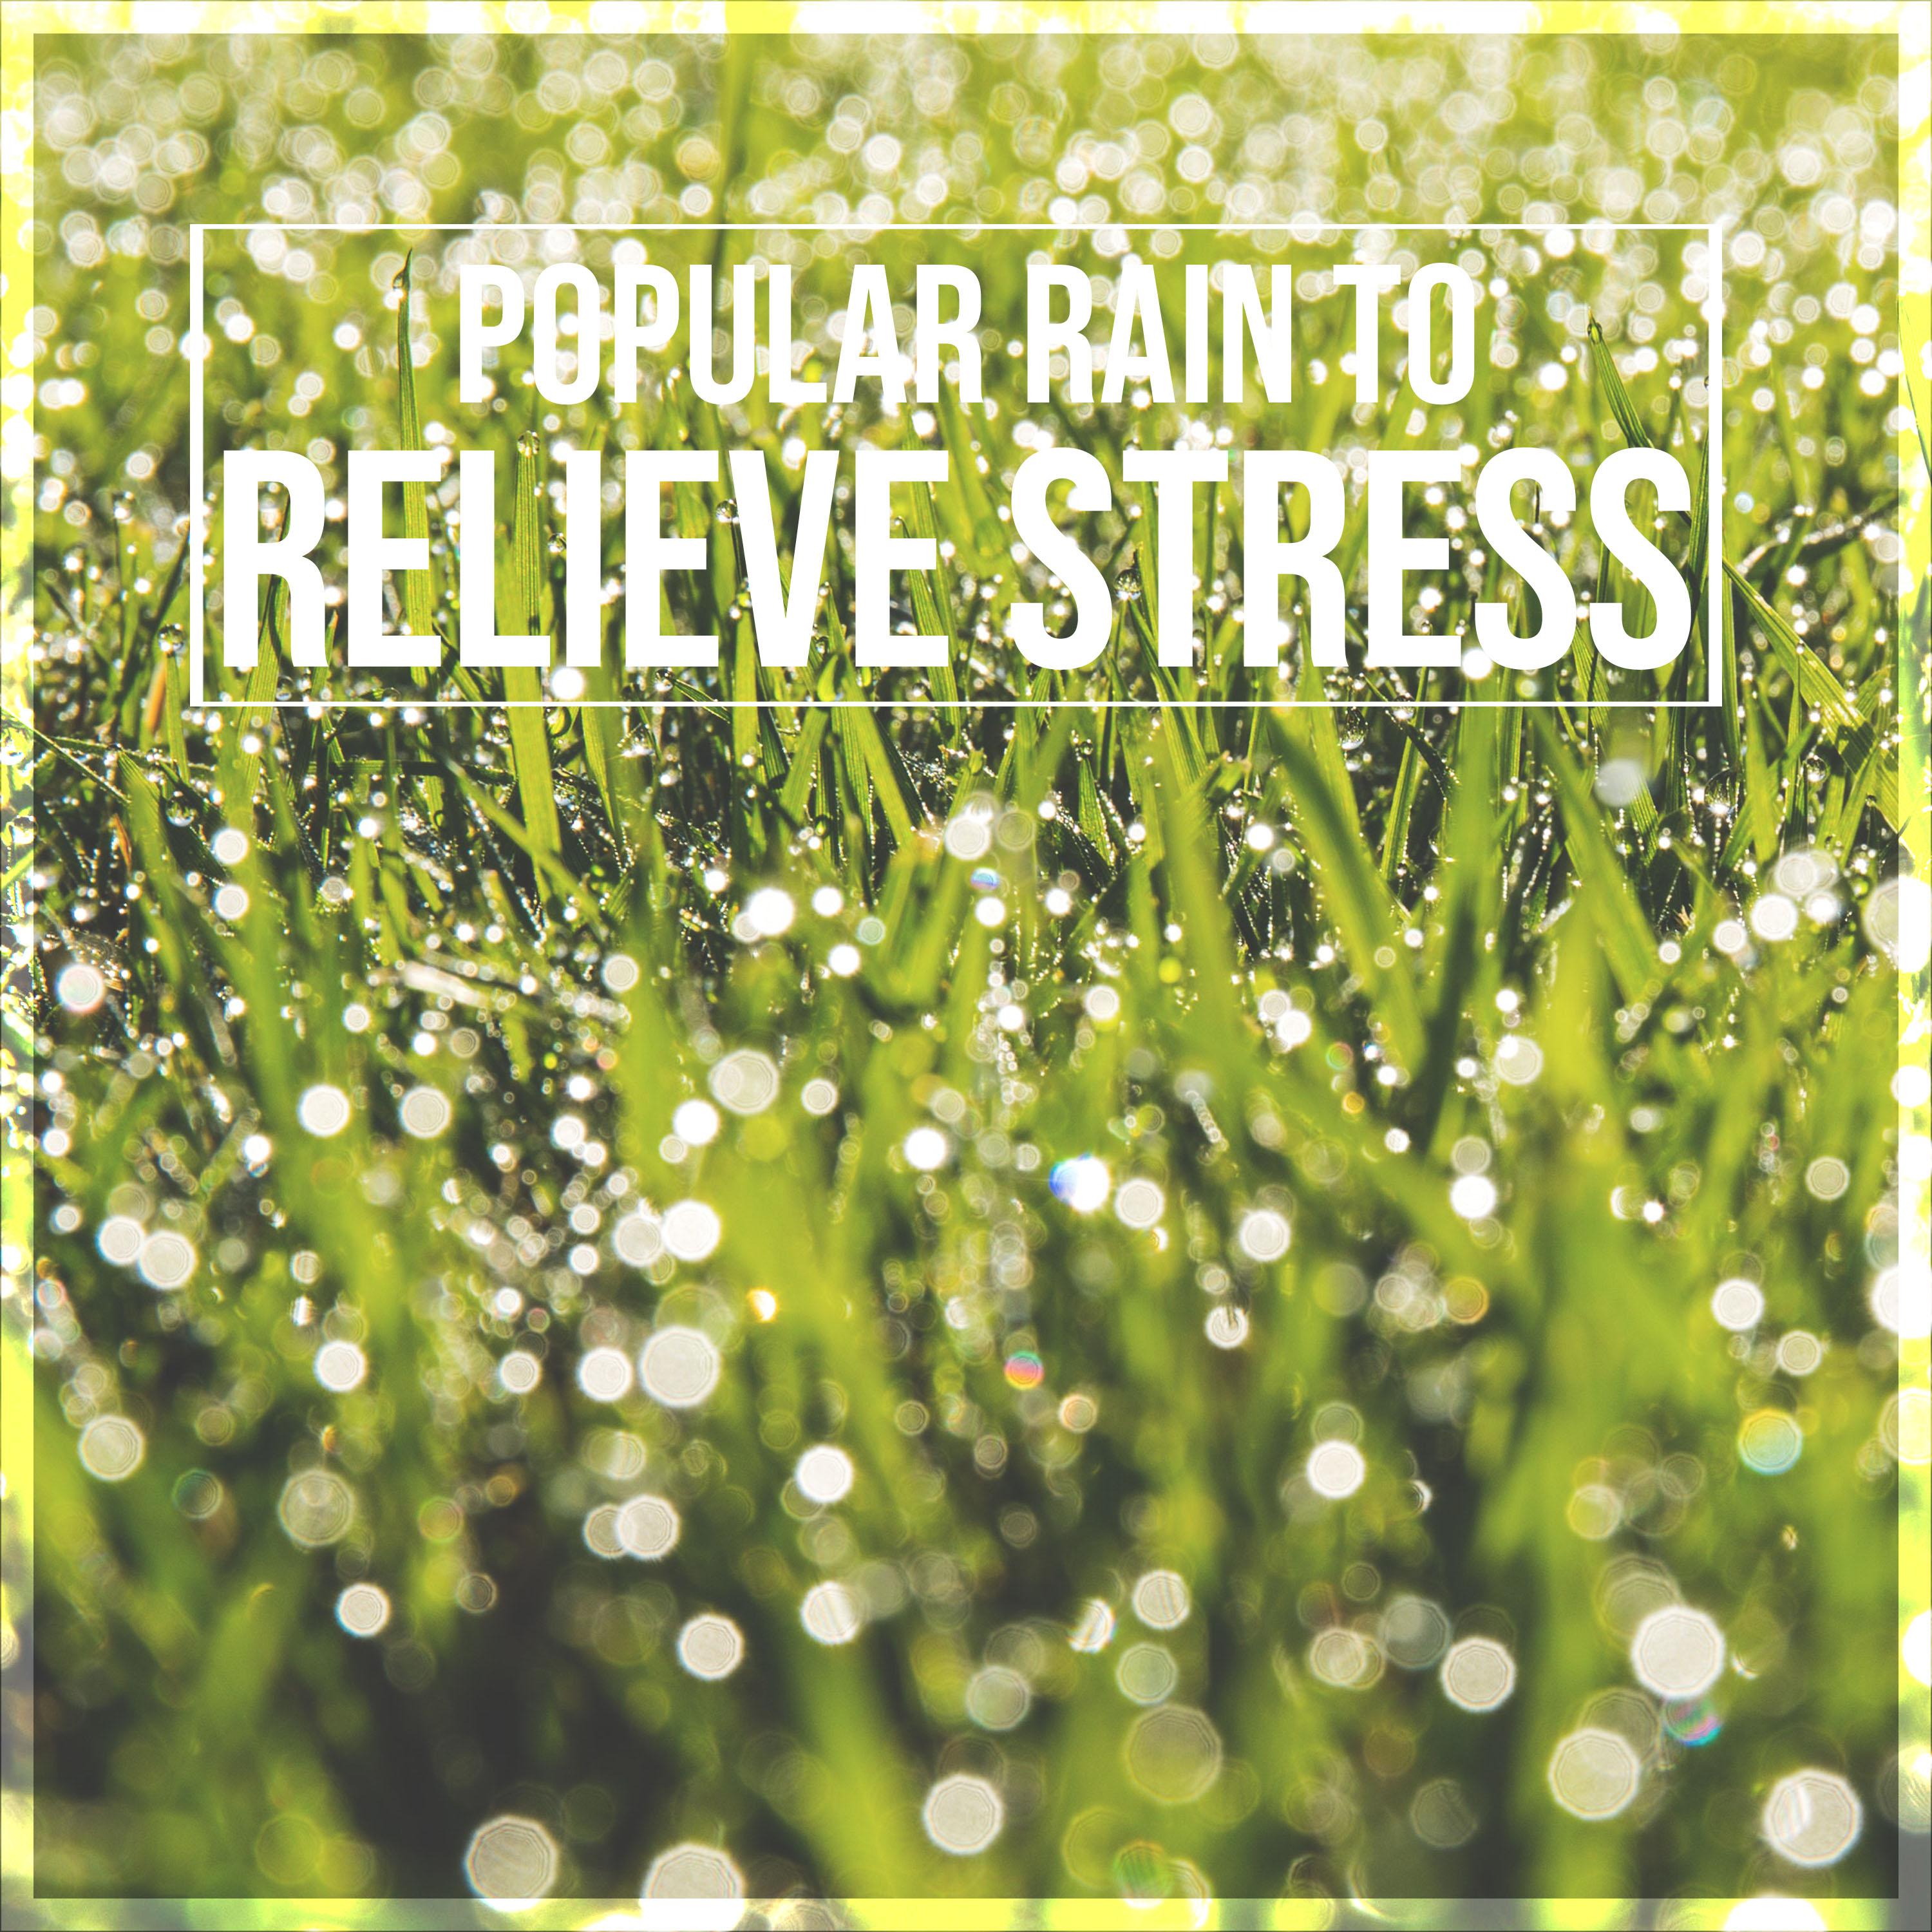 #18 Popular Rain Songs to Relieve Stress